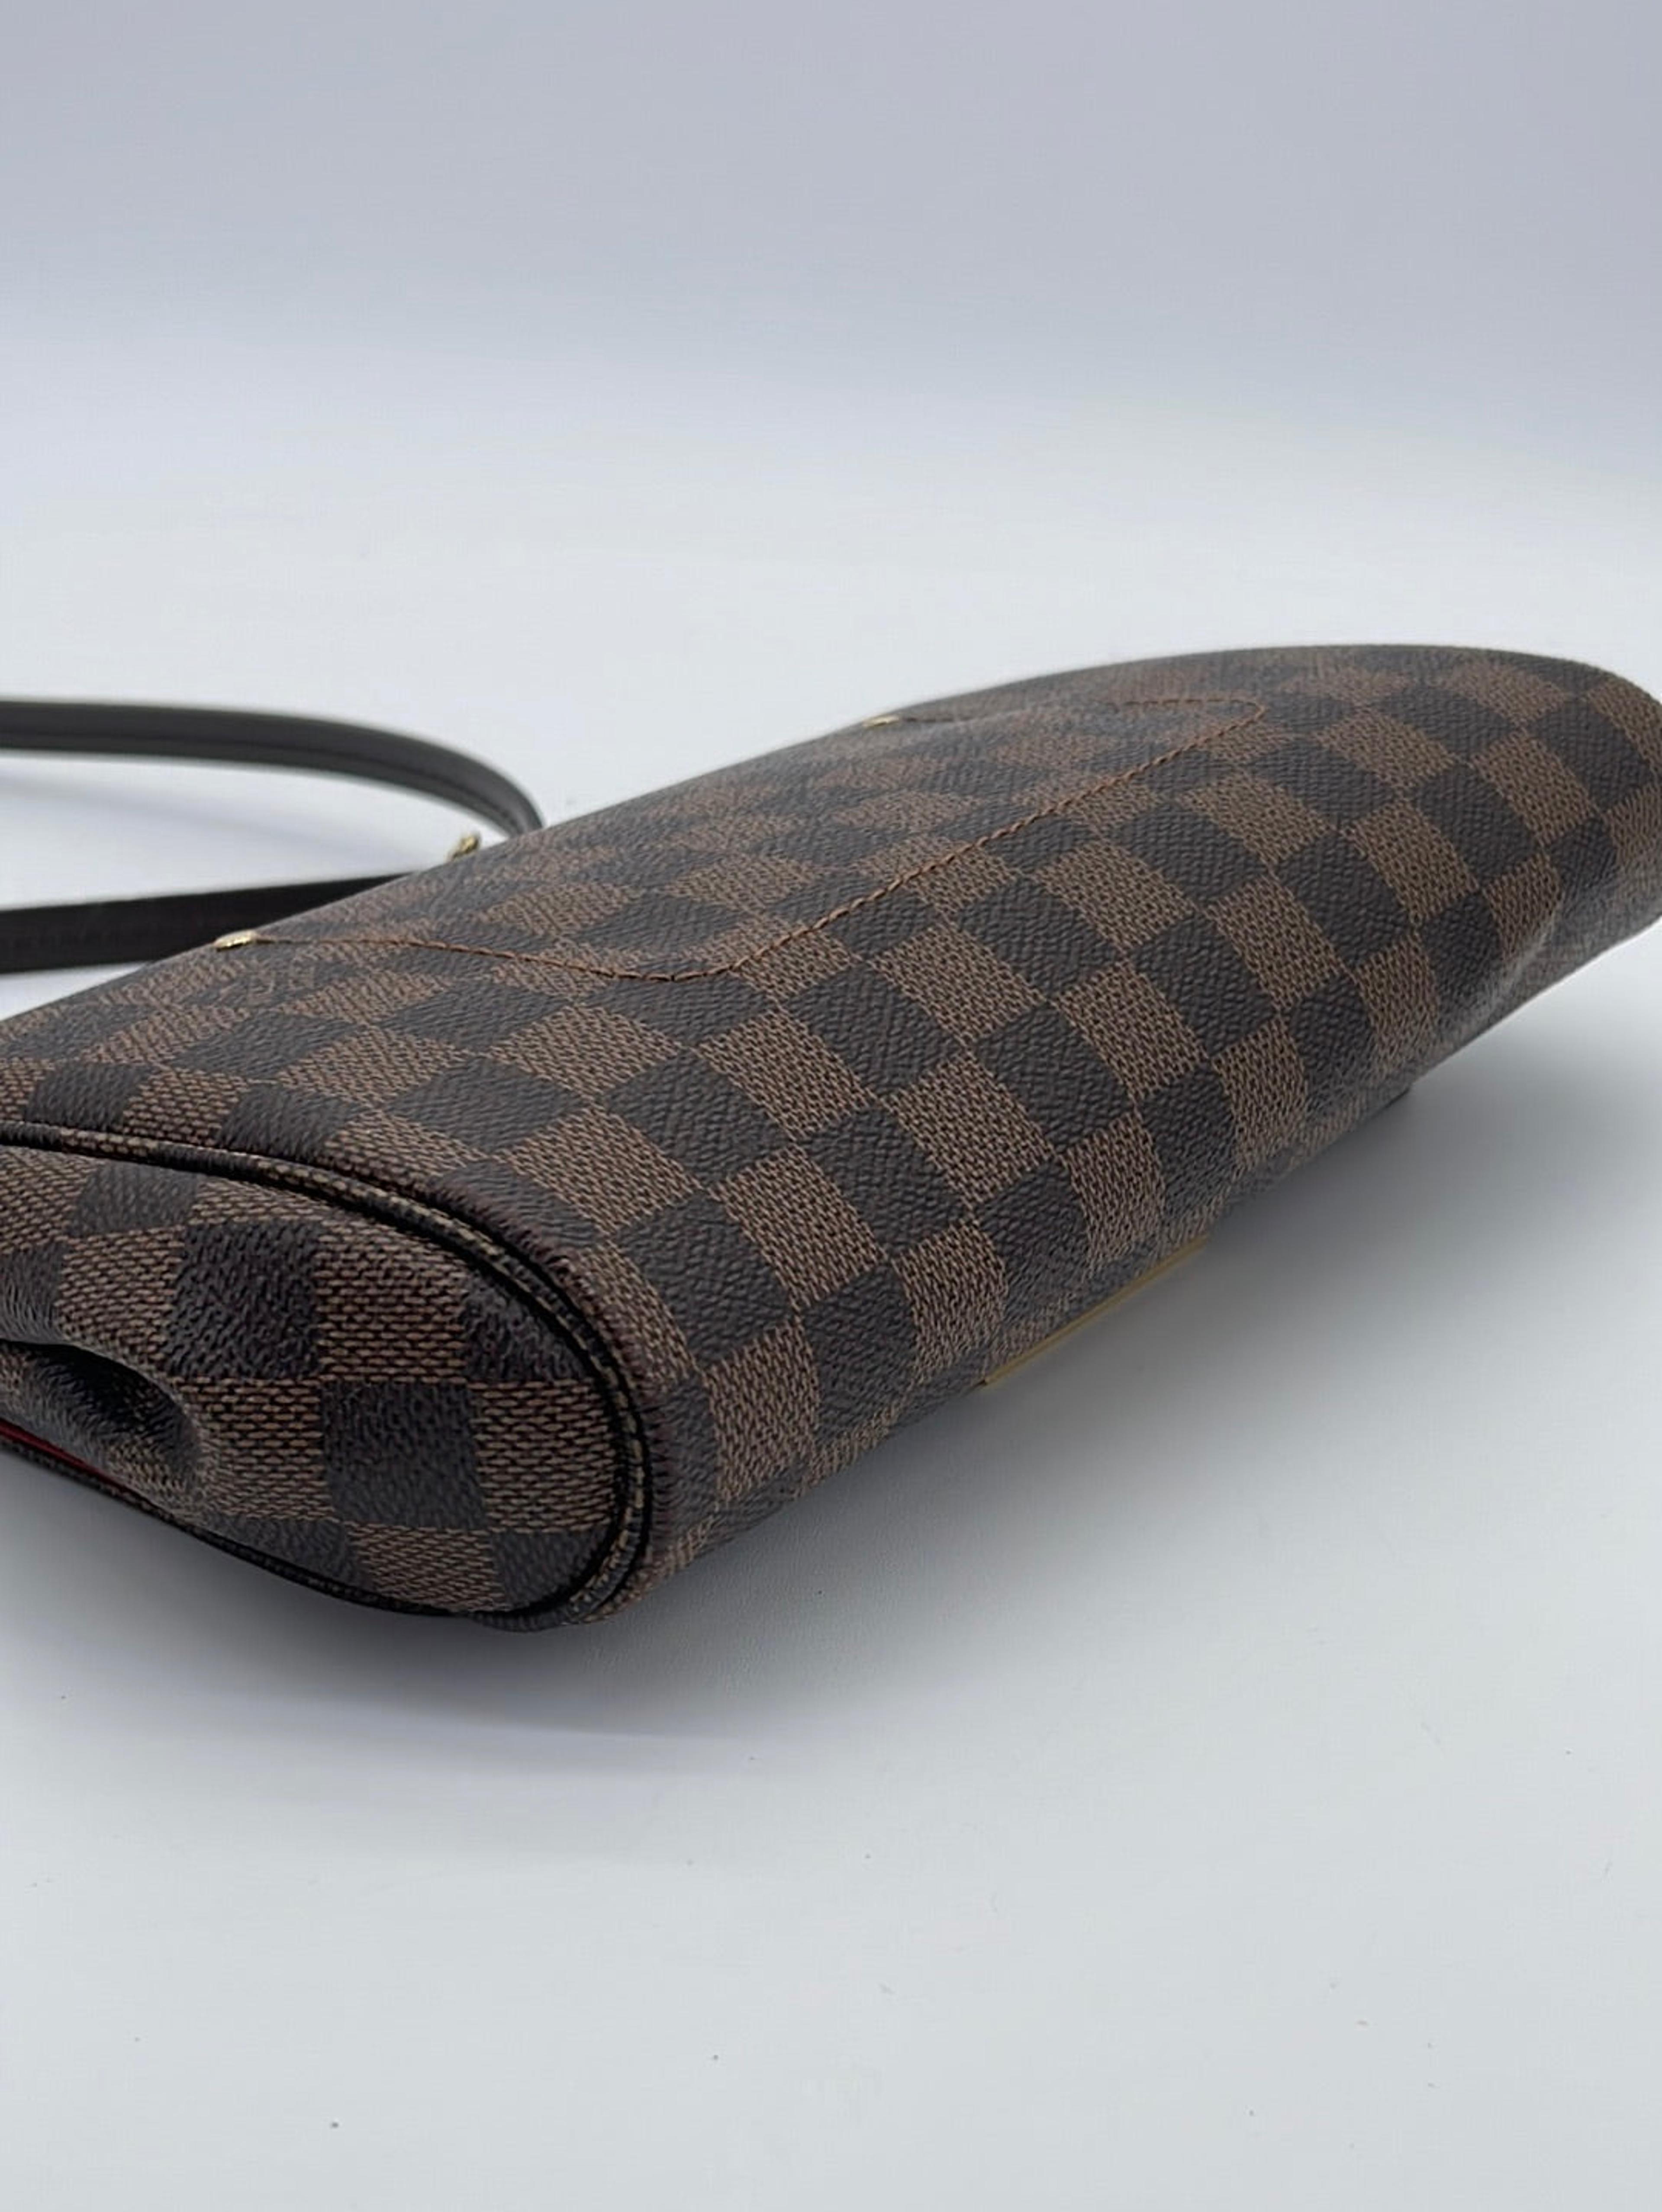 neverfull discontinued